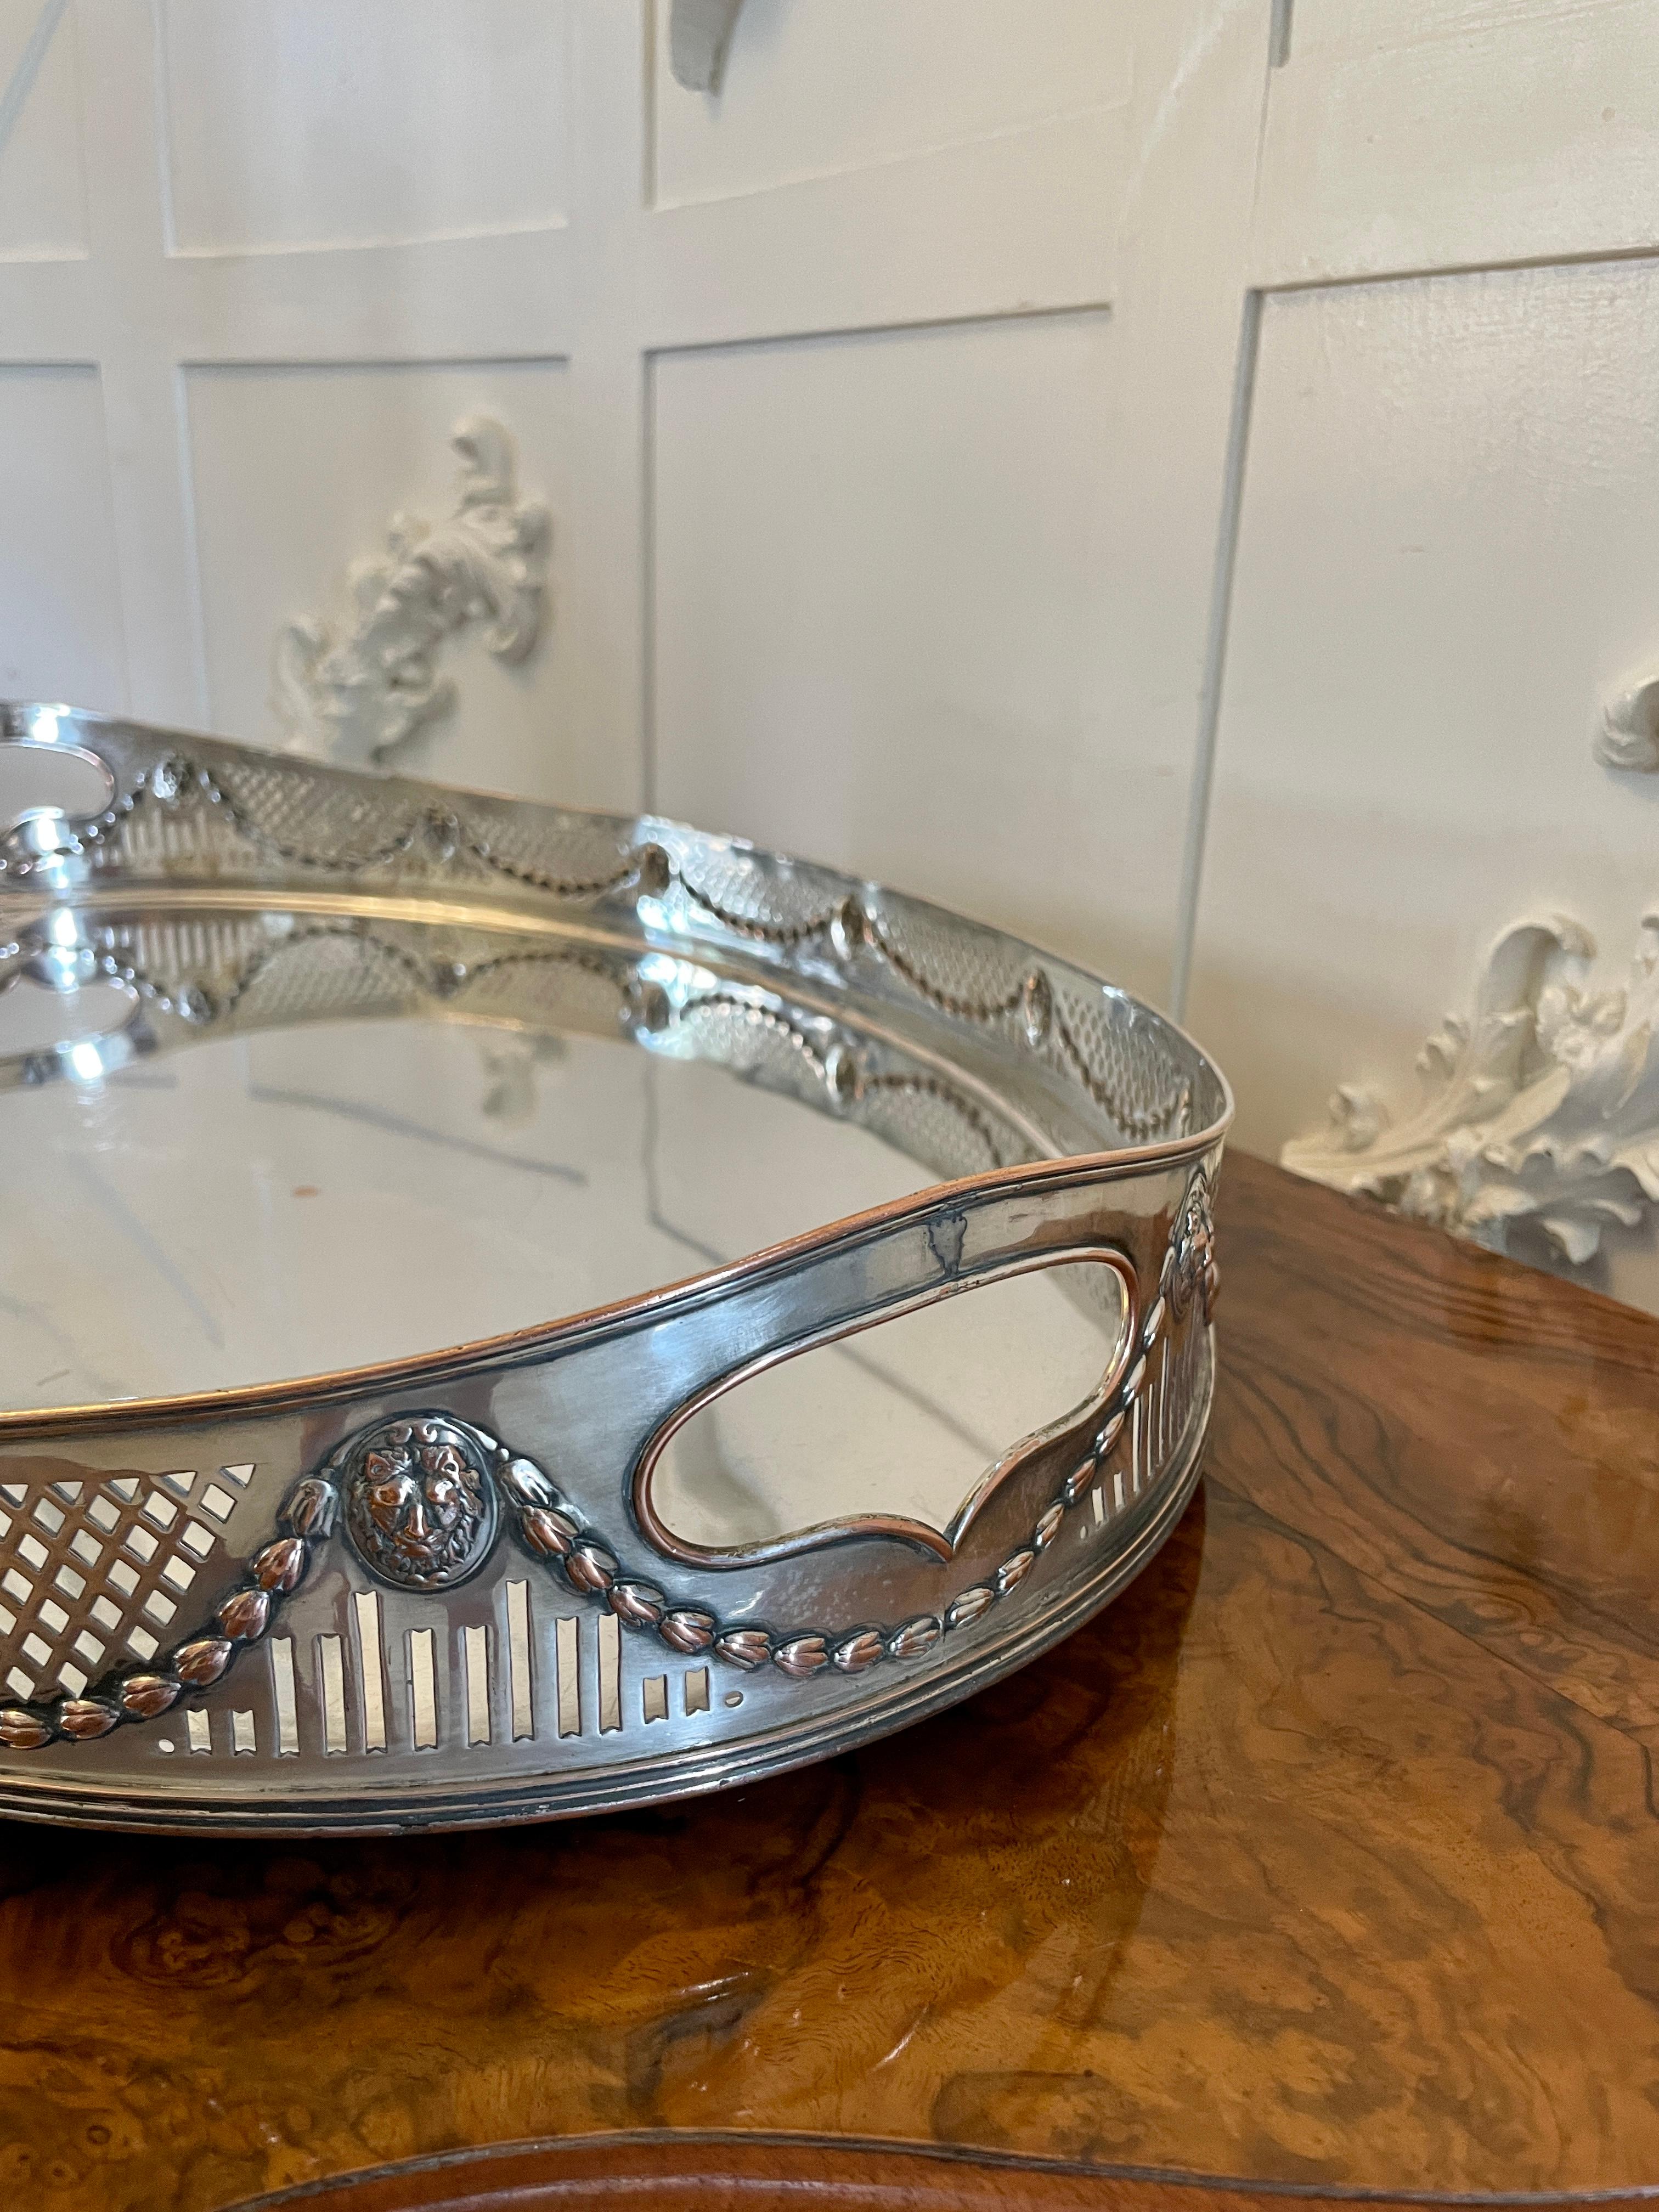  Large Antique Edwardian Quality Silver Plated Oval Shaped Tea Tray  For Sale 2